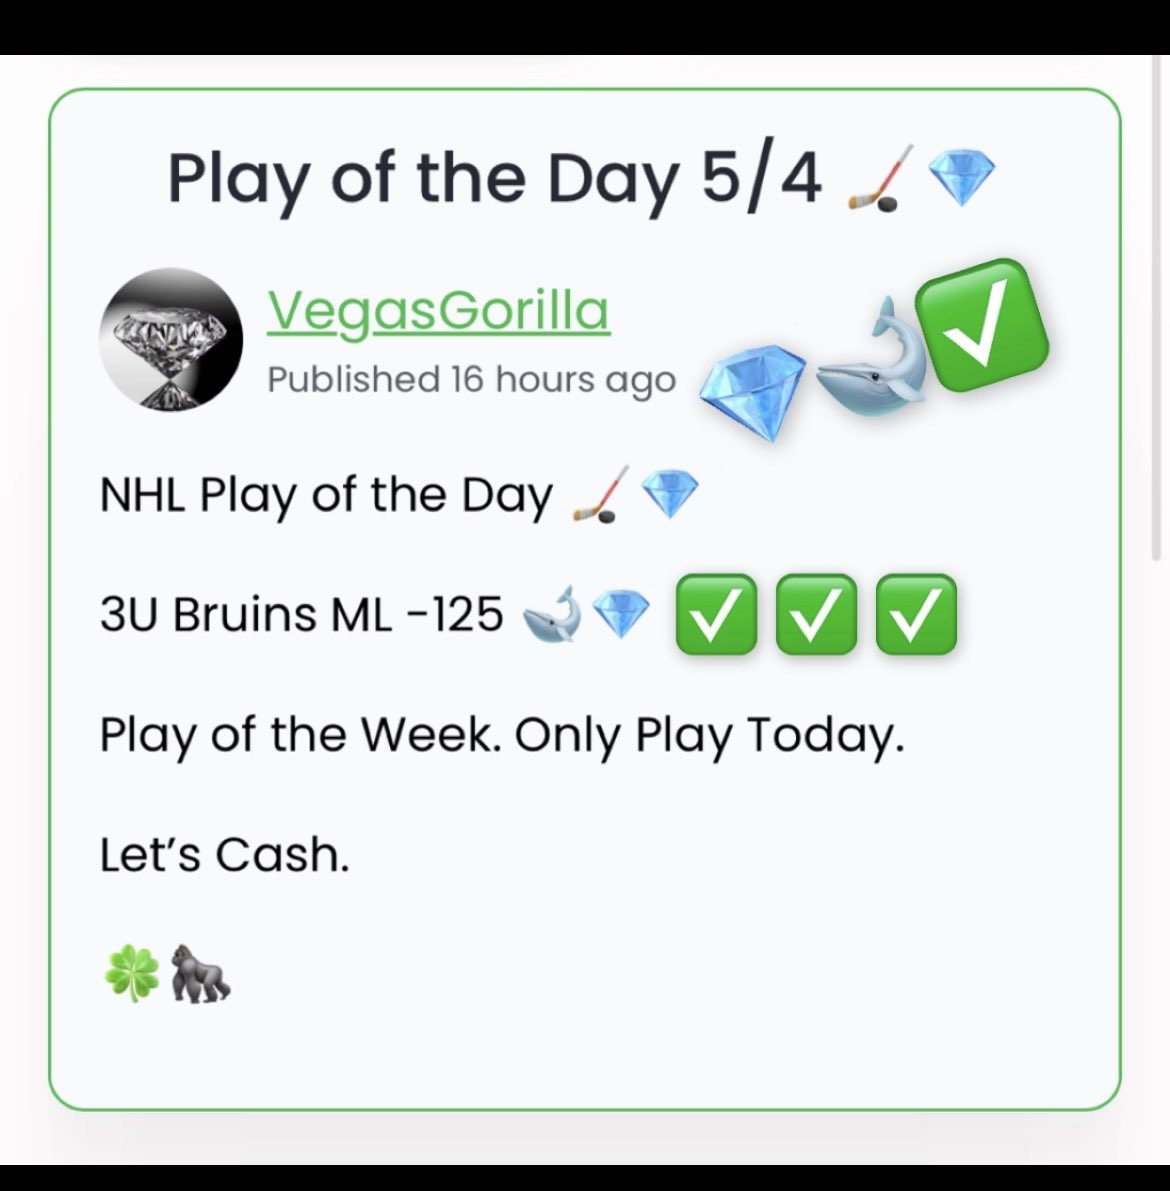 VG Play of the Week Recap 💎🐋✅ CASHHH The VIP Play of the Week.💎✅ 3U Bruins ML -125 🐋💎✅✅✅ Another Play of the Week Cashes in the Jungle. Sunday VIP Plays out Next. 7-DAY FREE FULL ACCESS TRIAL.💎🚨⬇️ VIP SUB💎⏭️ dubclub.win/r/p/pri-v8t2g/… 🍀🦍